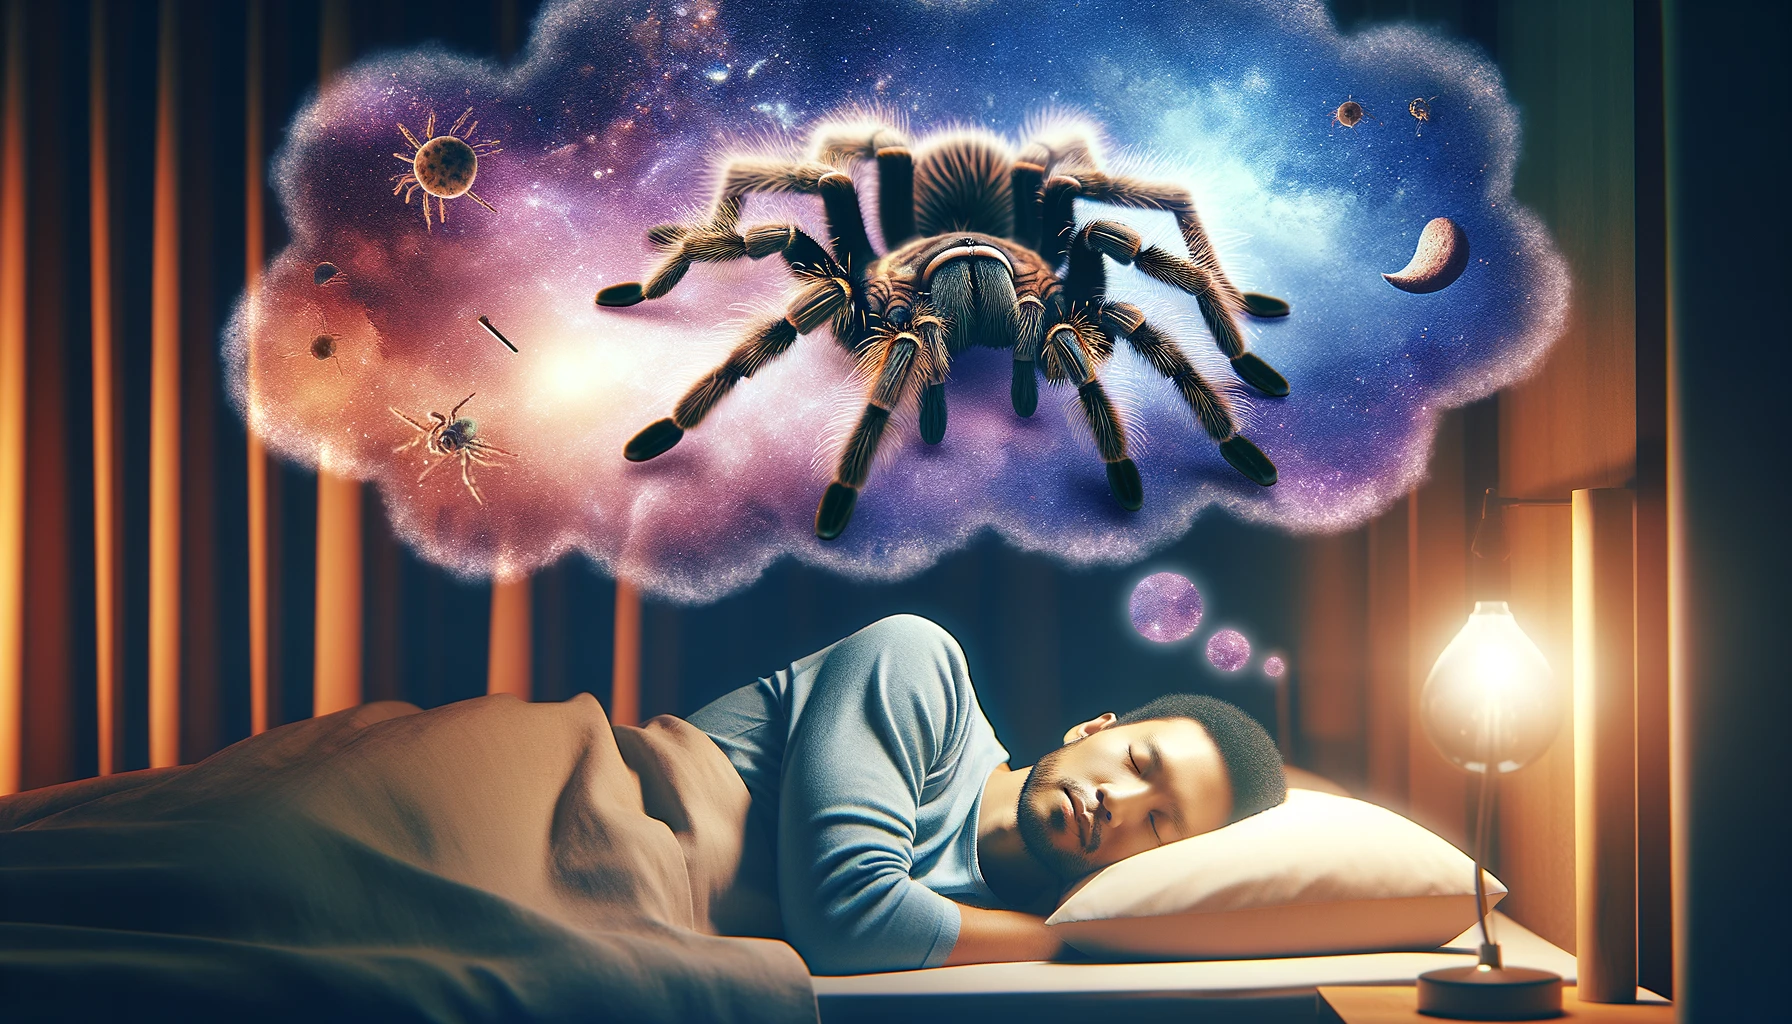 man in bed dreaming of a tarantula featured image